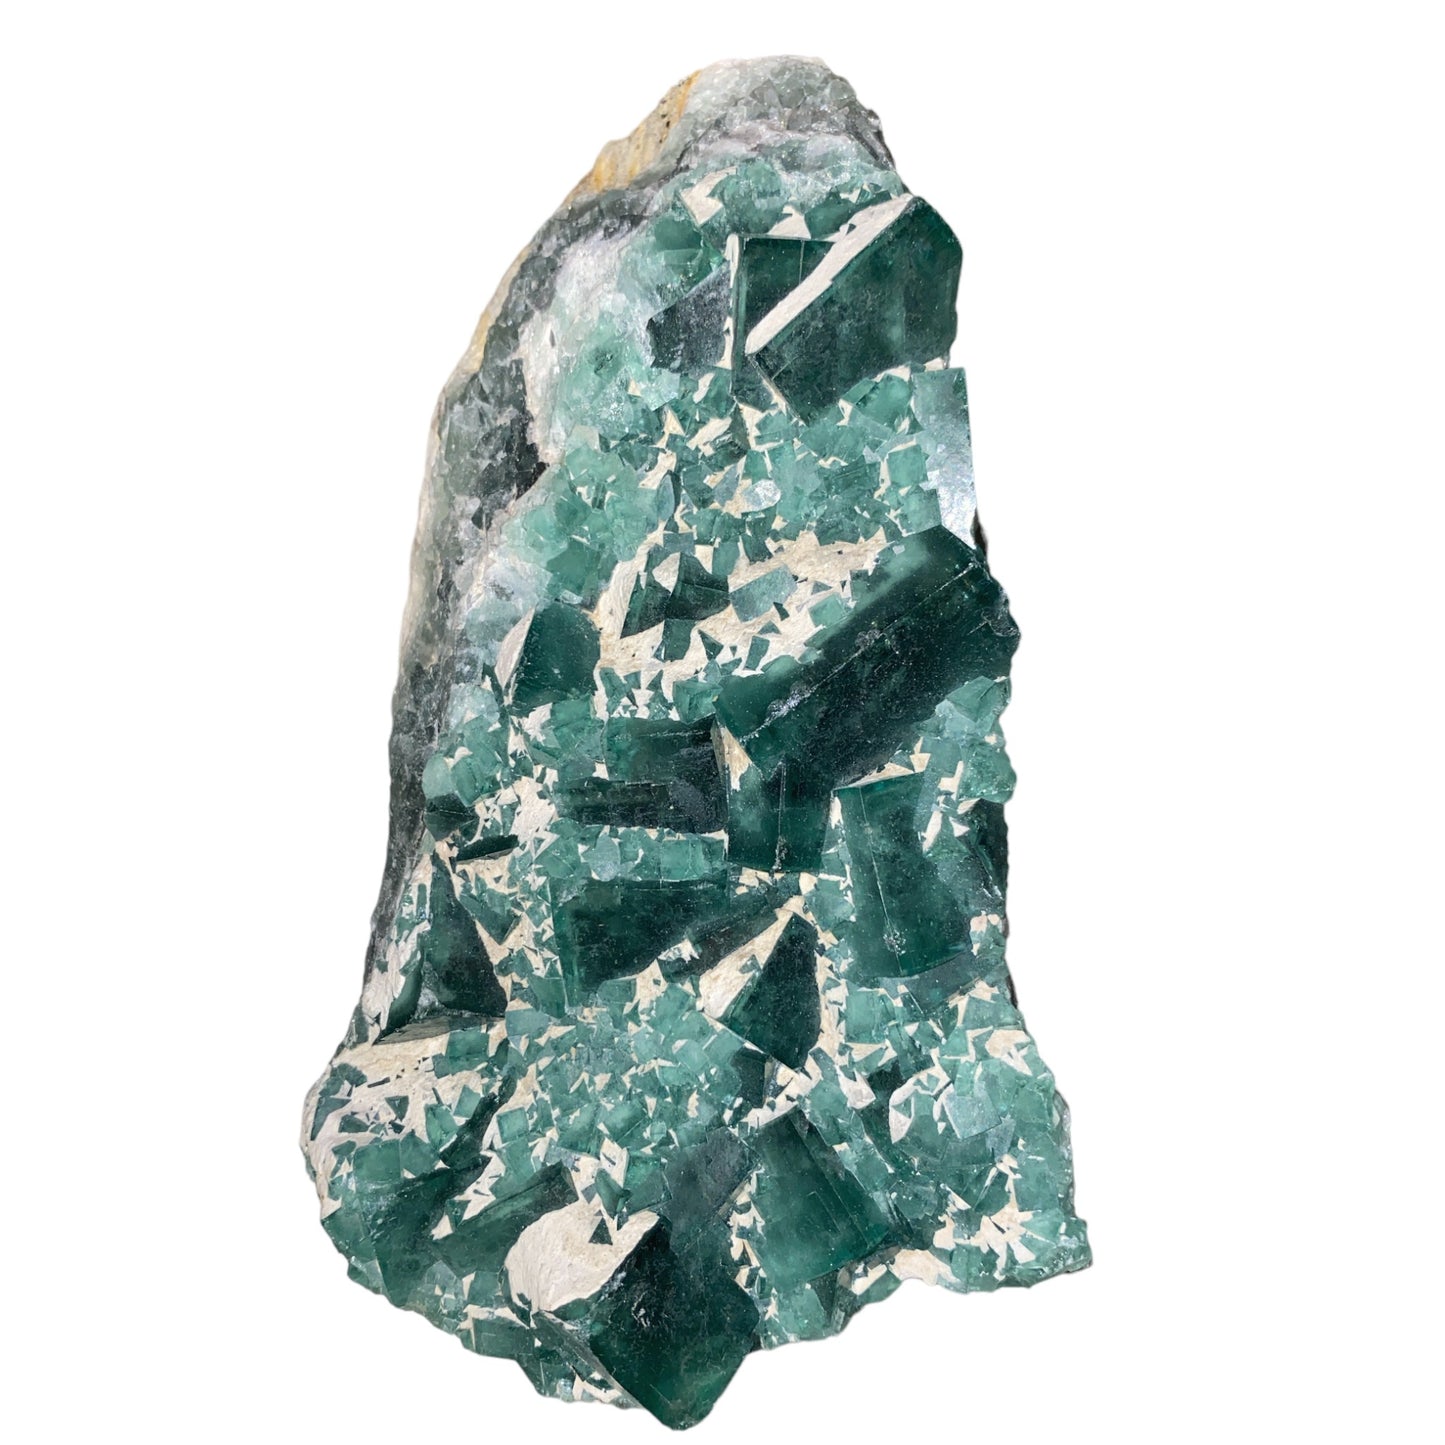 Natural Green Fluorite Specimens - China - Price per Piece & by Quality (Make note of id# and put in order comments) - CRYSTAL REQUEST - NEW323